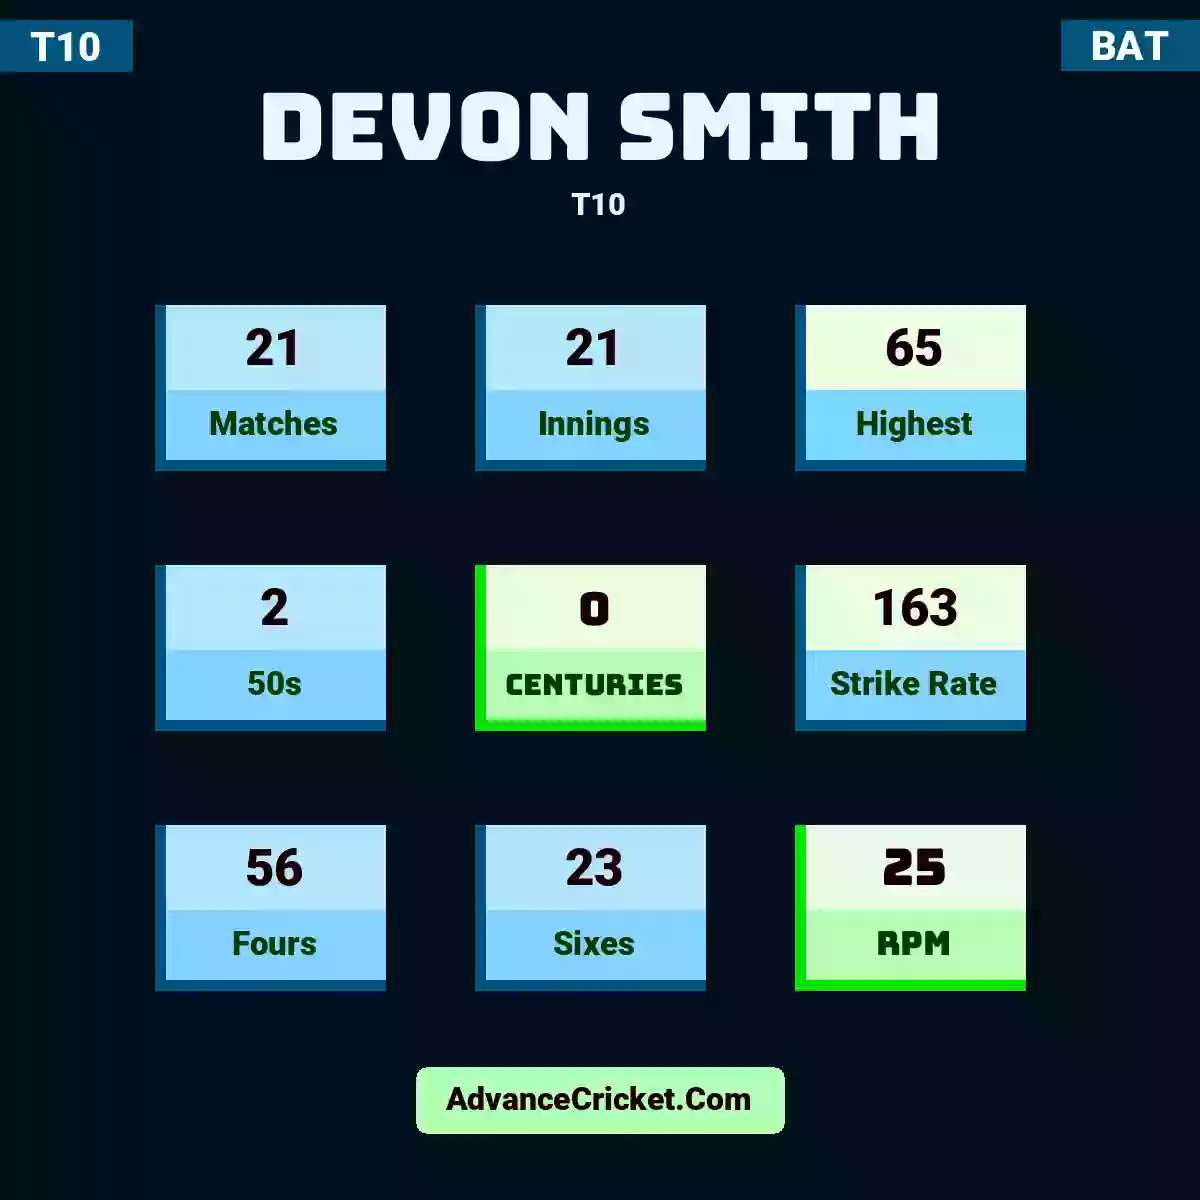 Devon Smith T10 , Devon Smith played 21 matches, scored 65 runs as highest, 2 half-centuries, and 0 centuries, with a strike rate of 163. D.Smith hit 56 fours and 23 sixes, with an RPM of 25.